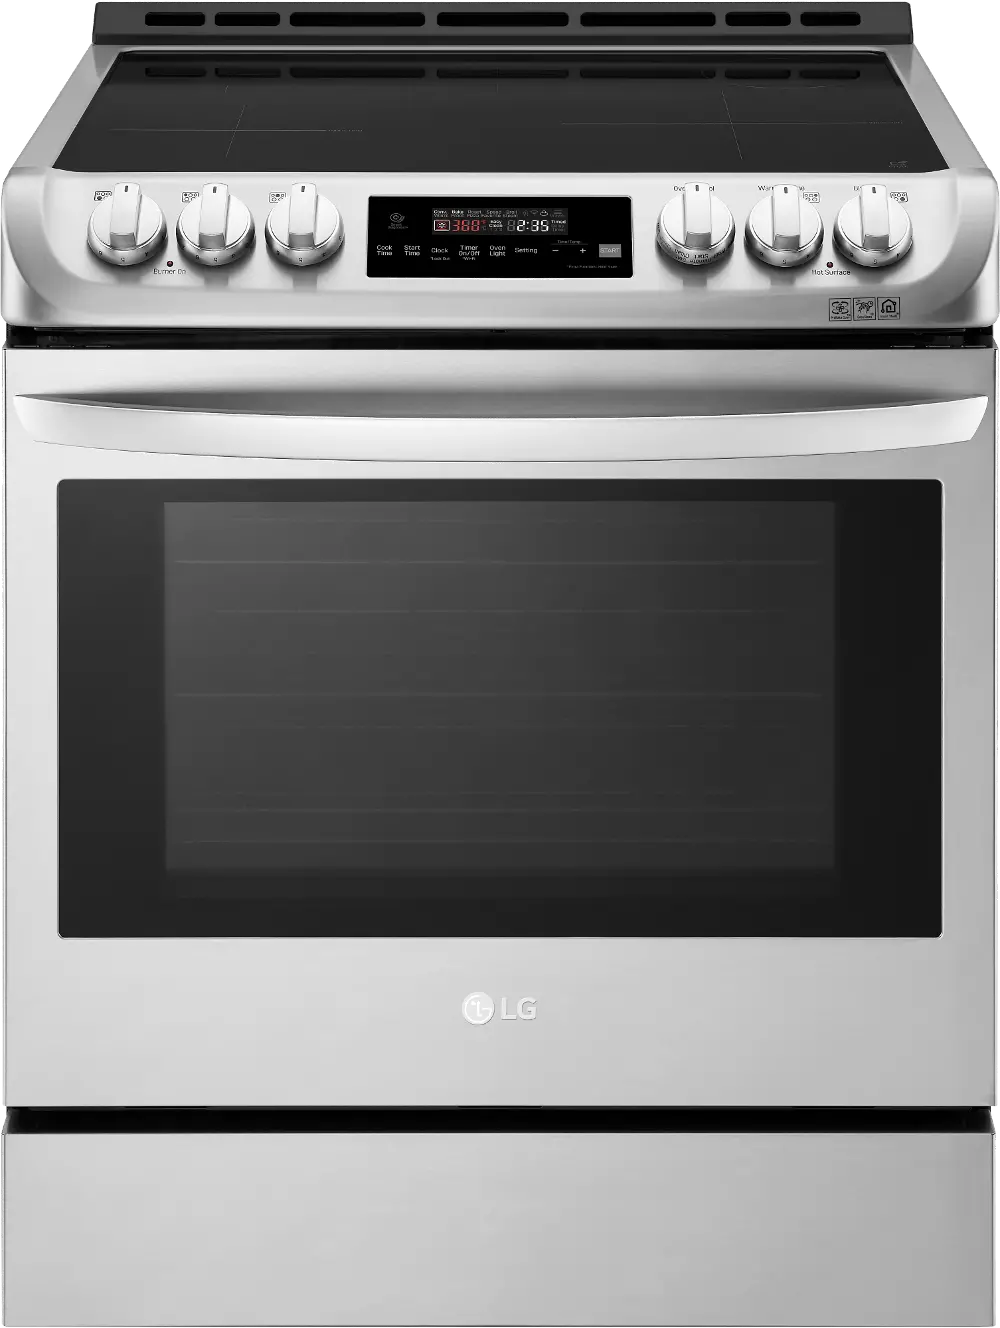 LSE4616ST LG 6.3 cu ft Electric Induction Range - Stainless Steel-1